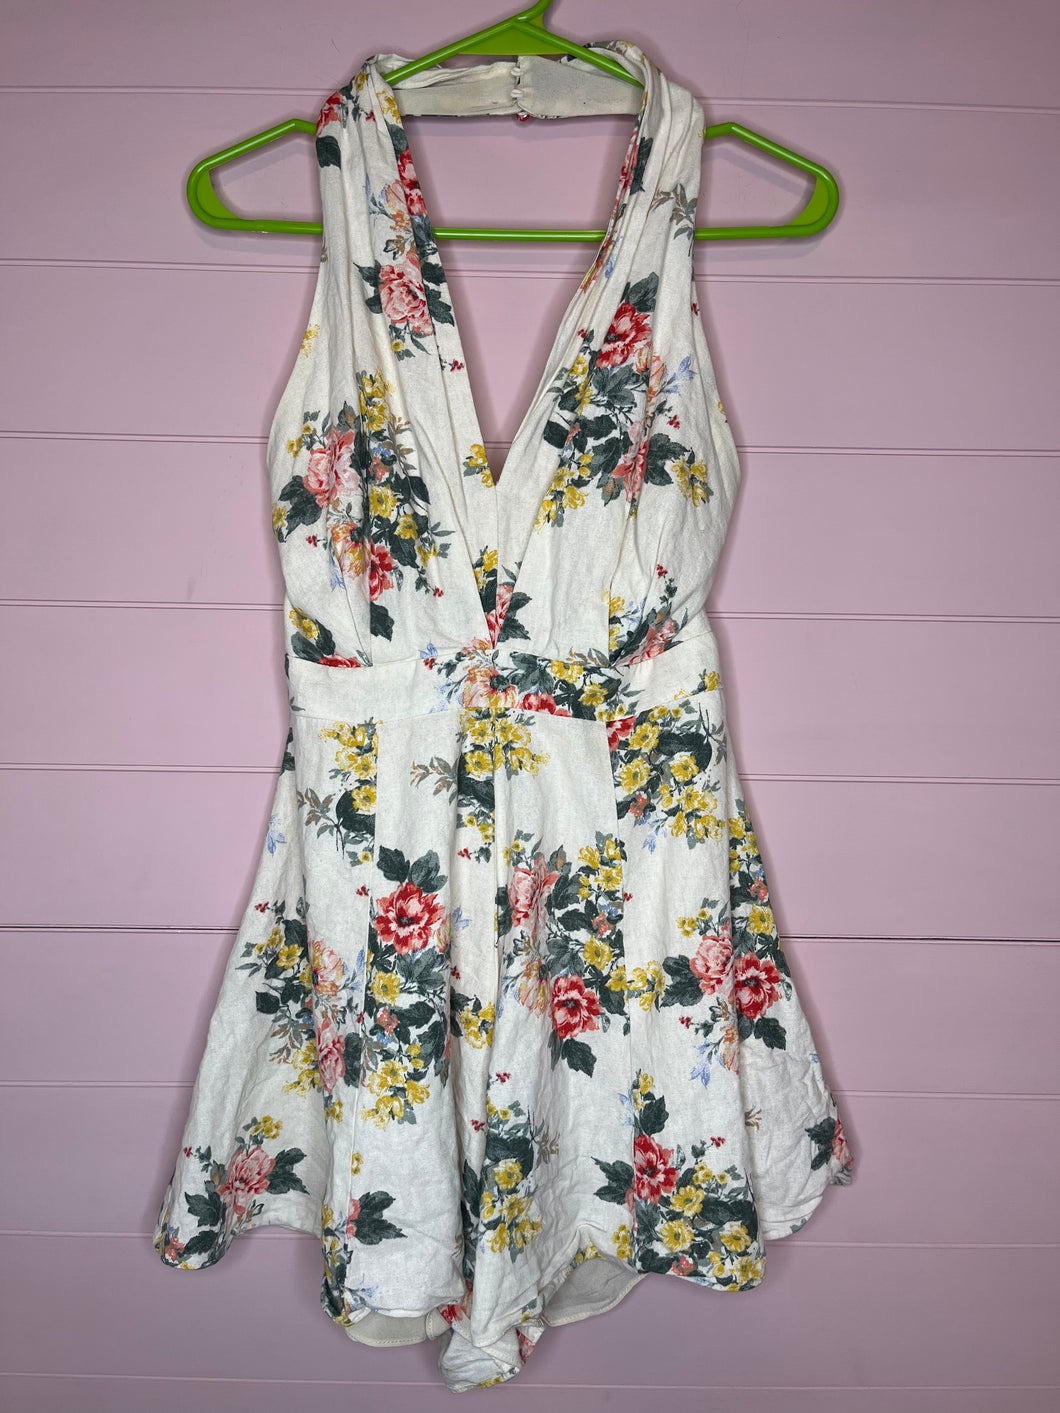 Small Do+Be Floral Print Halter Top Romper